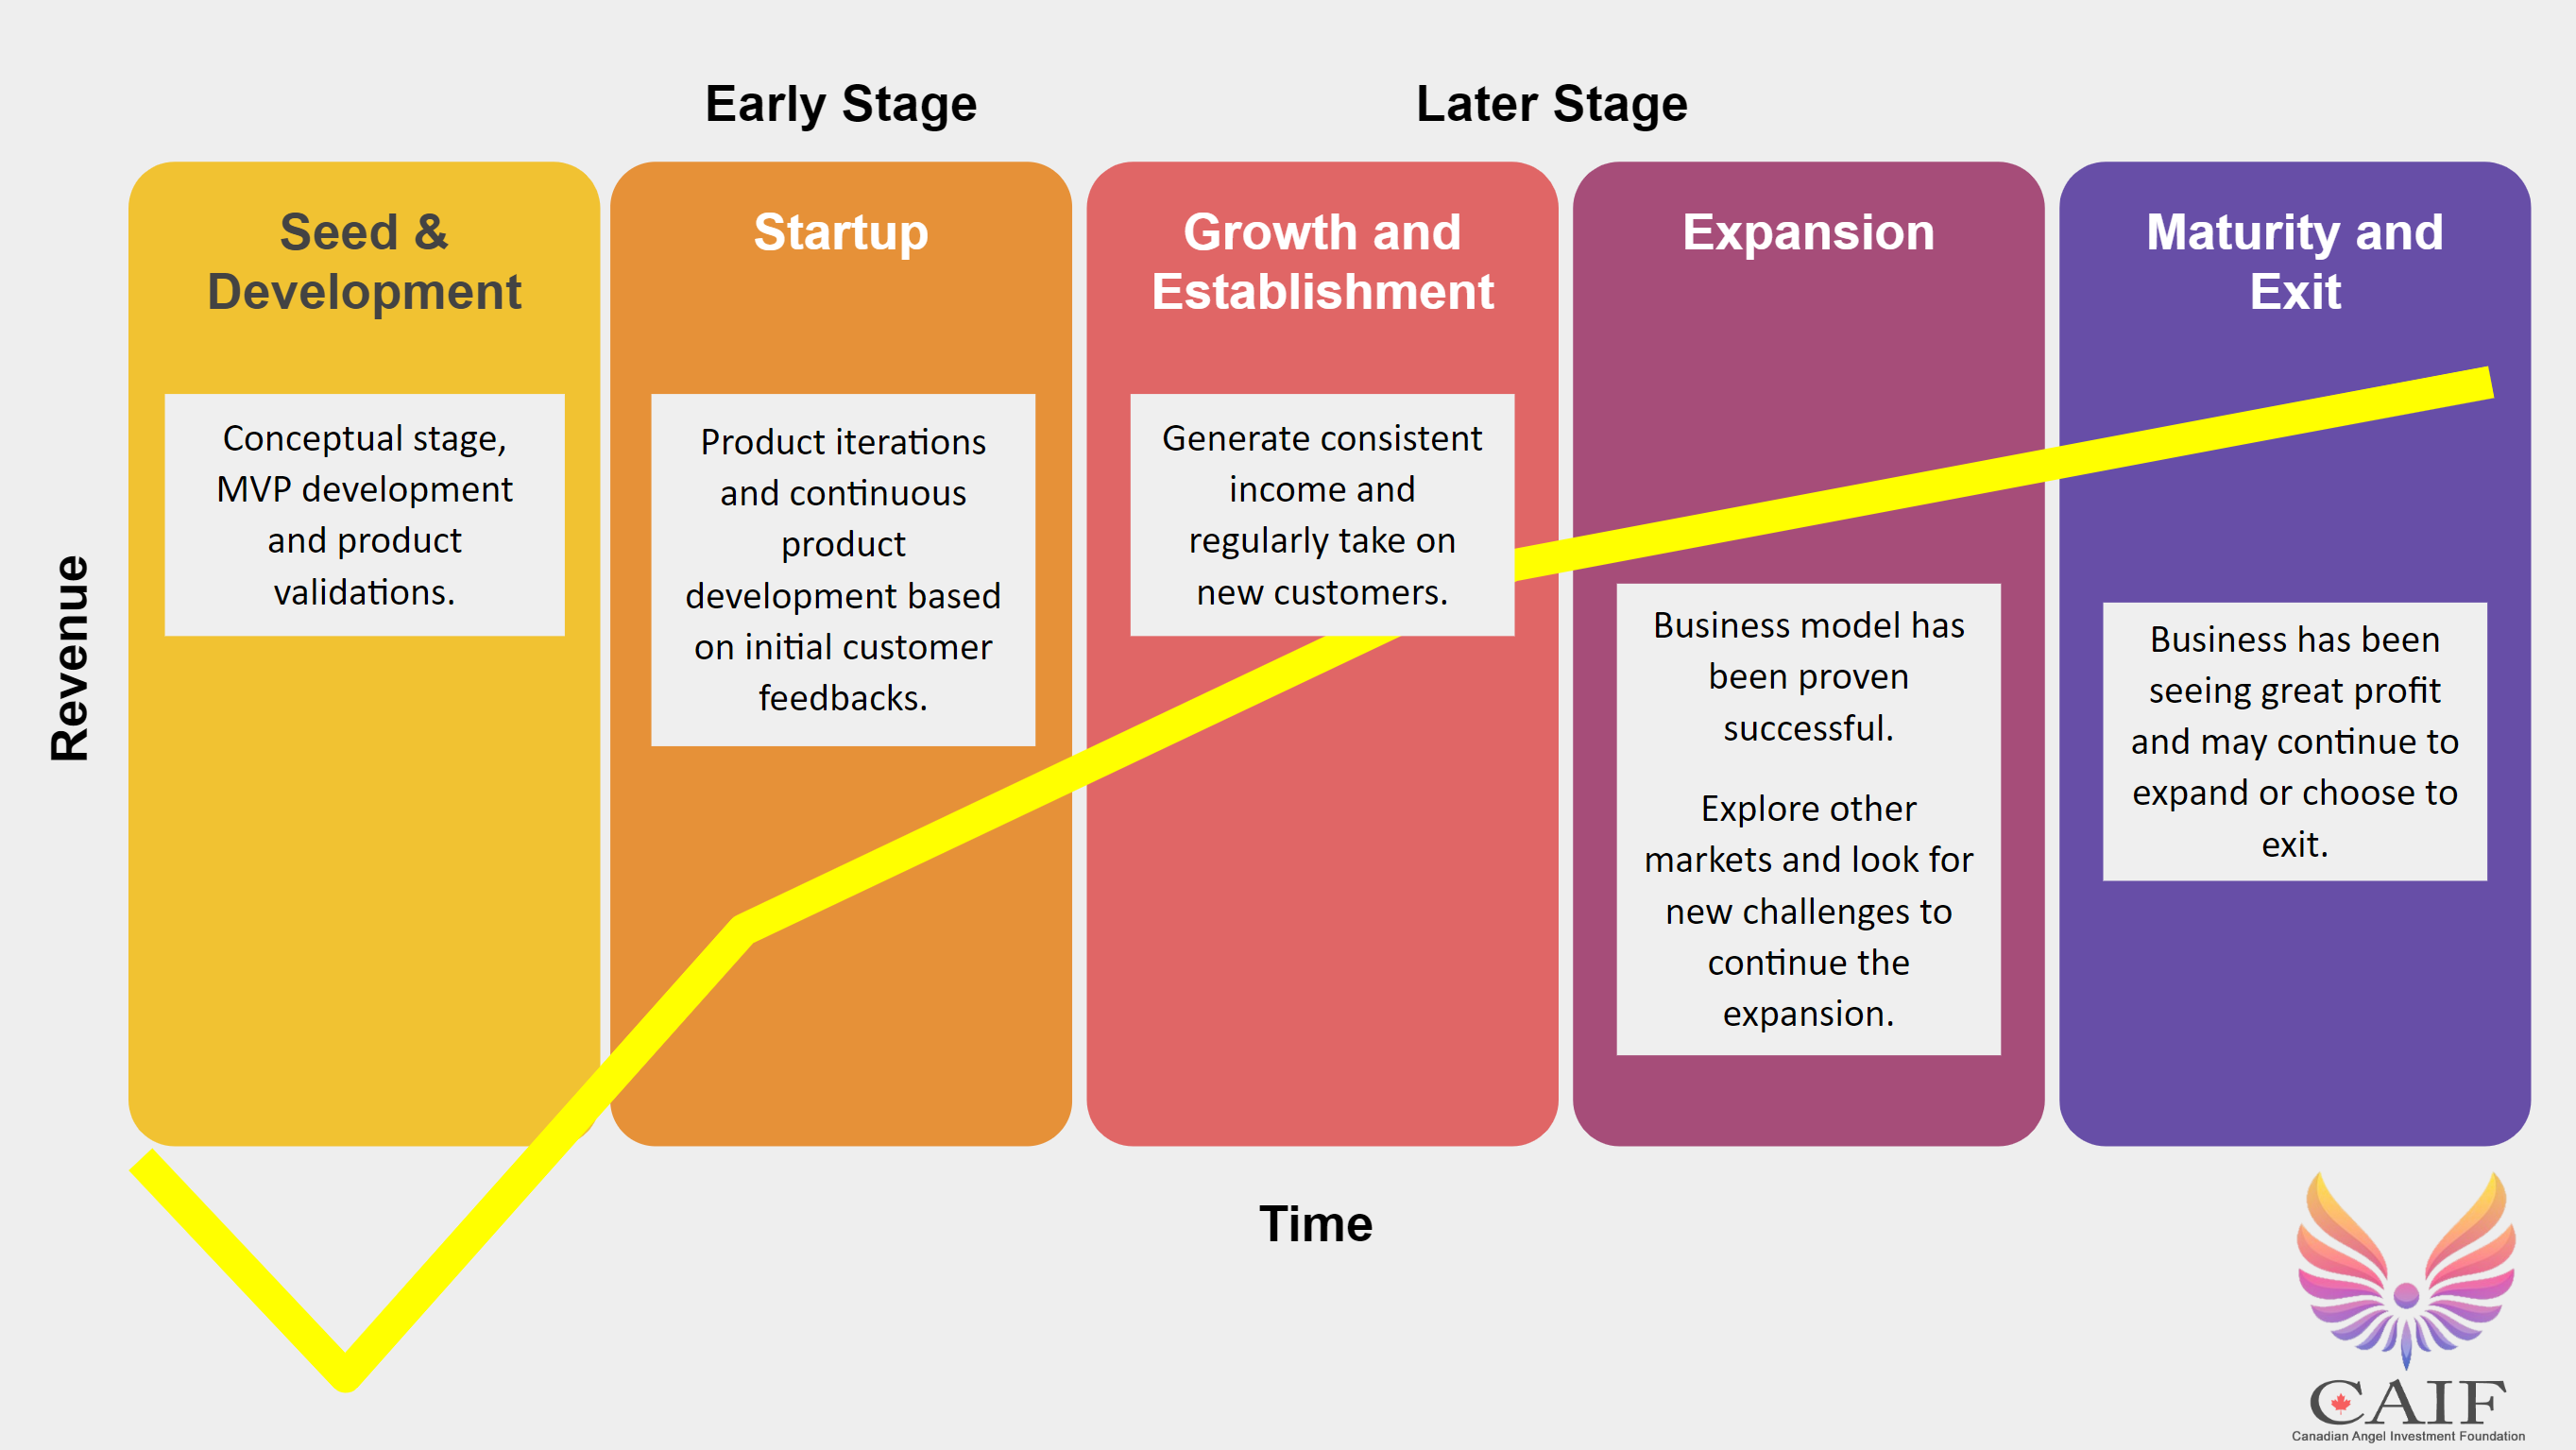 saas-startup-company-growth-101-getting-more-from-expansion-revenue